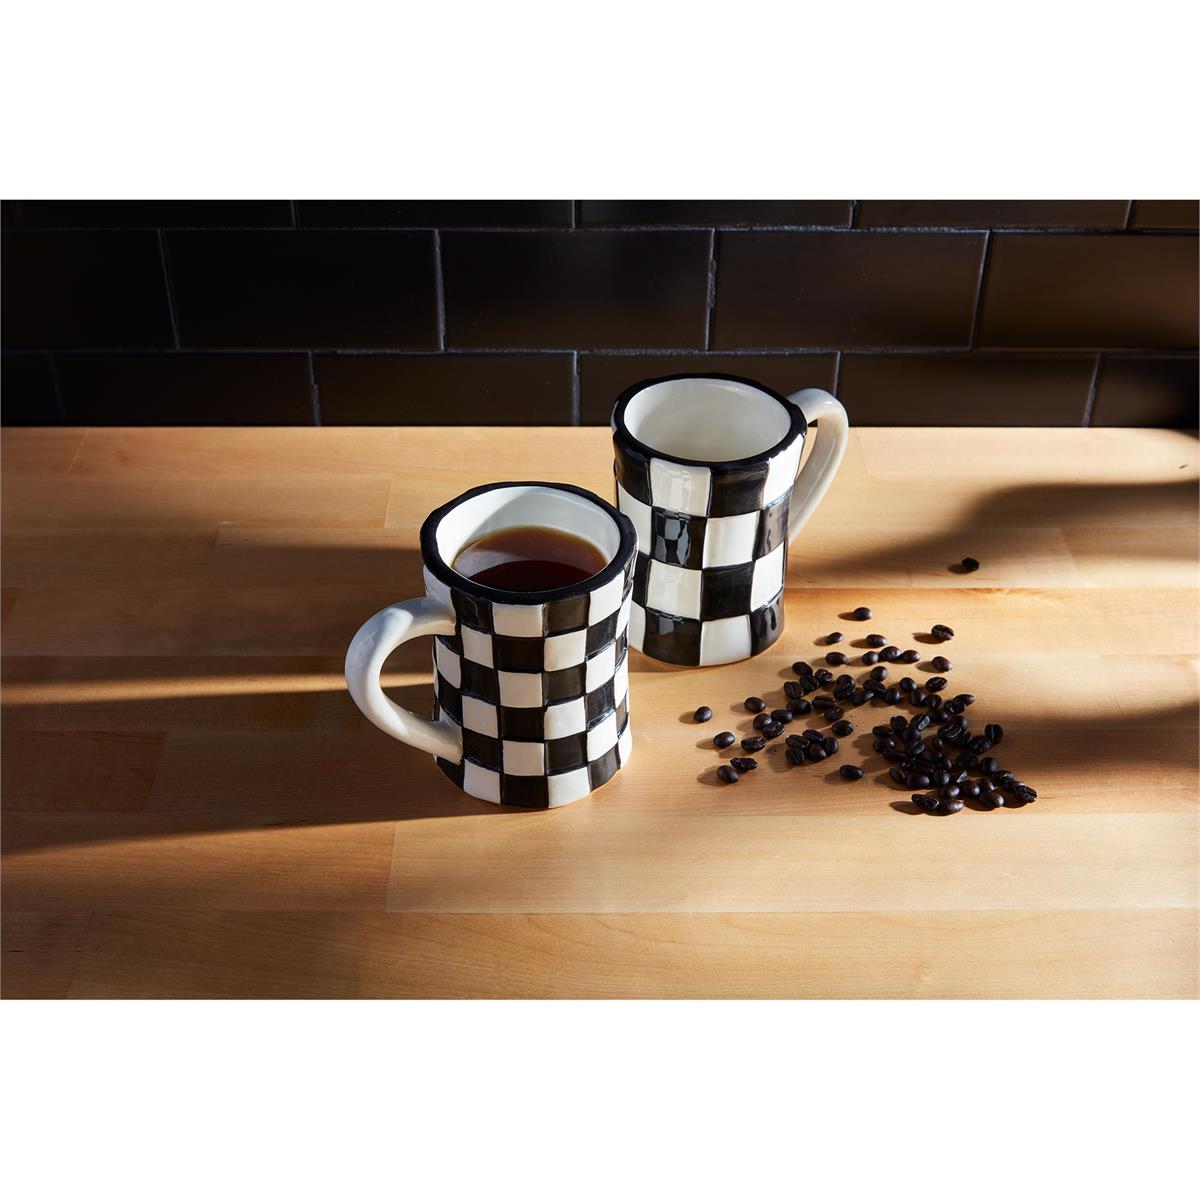 2 black and white checked mugs, one filled with coffee, on a wooden table with coffee beans scattered about.